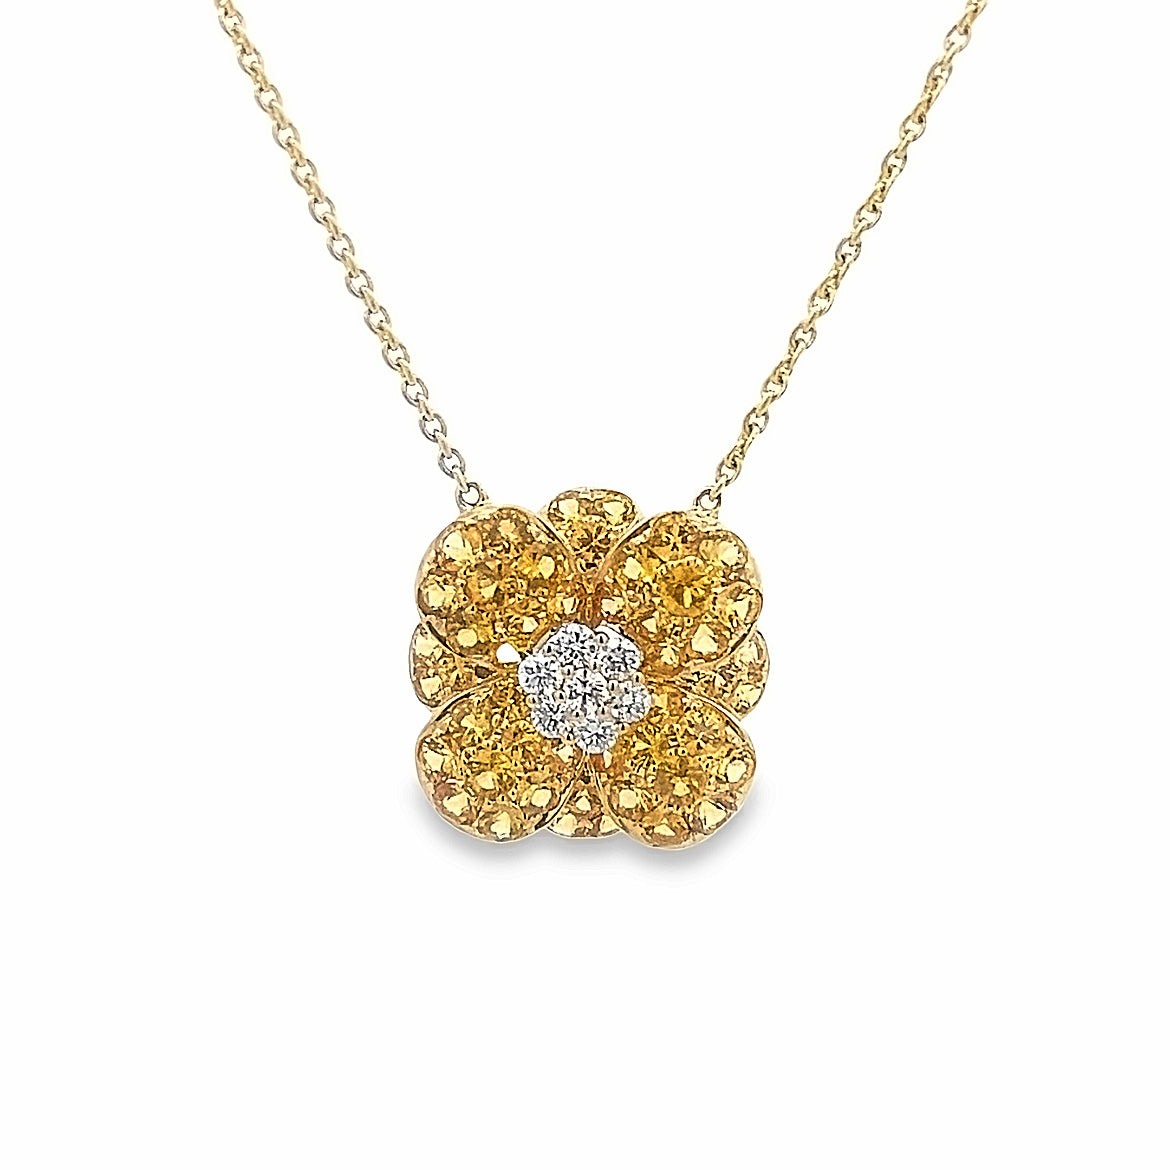 18K GOLD FLOWER NECKLACE WITH YELLOW SAPPHIRE